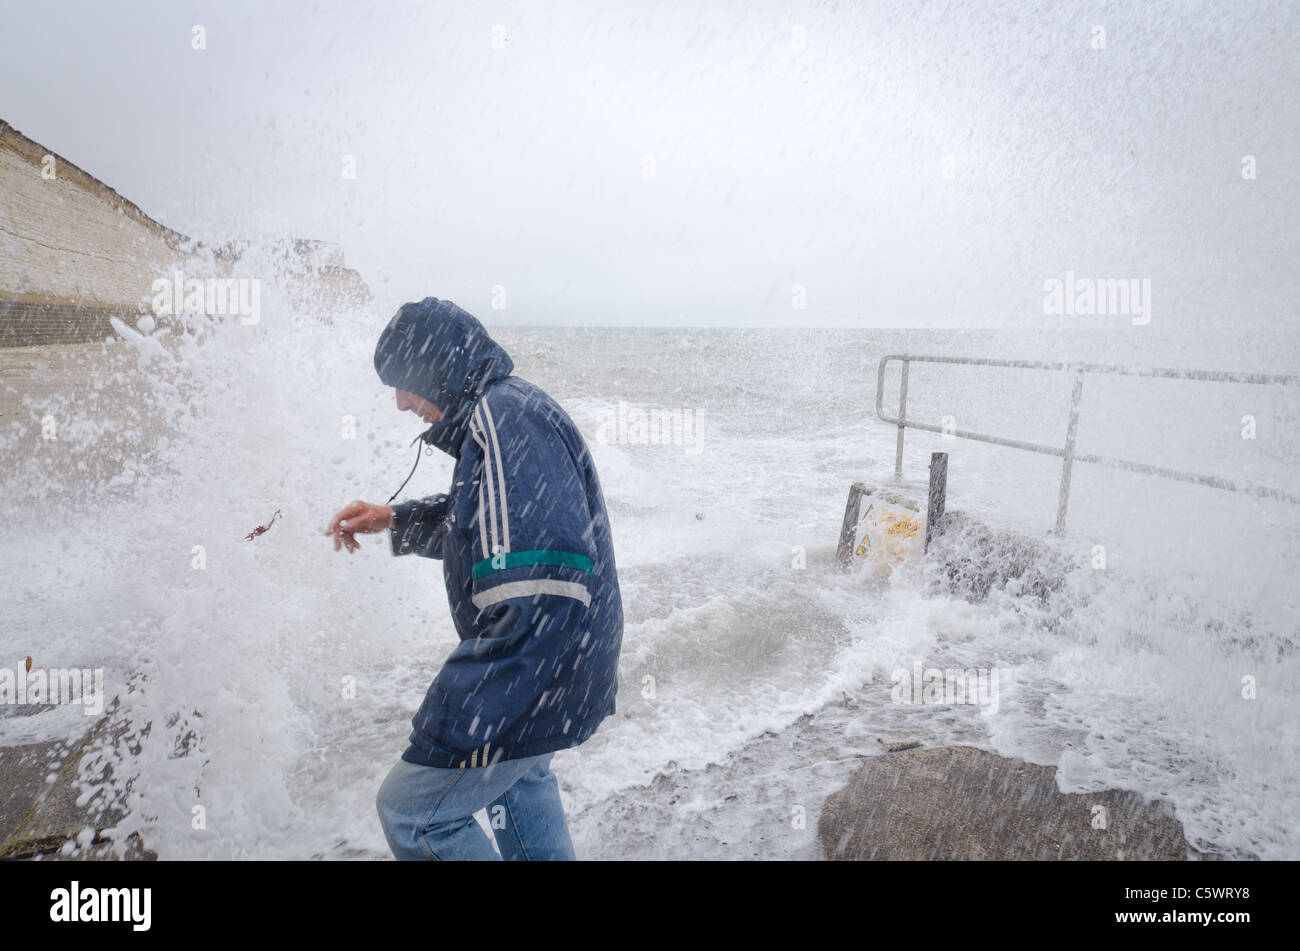 A man braves the stormy weather at Saltdean, East East Sussex, promenade, as waves hit the breakwater. Stock Photo